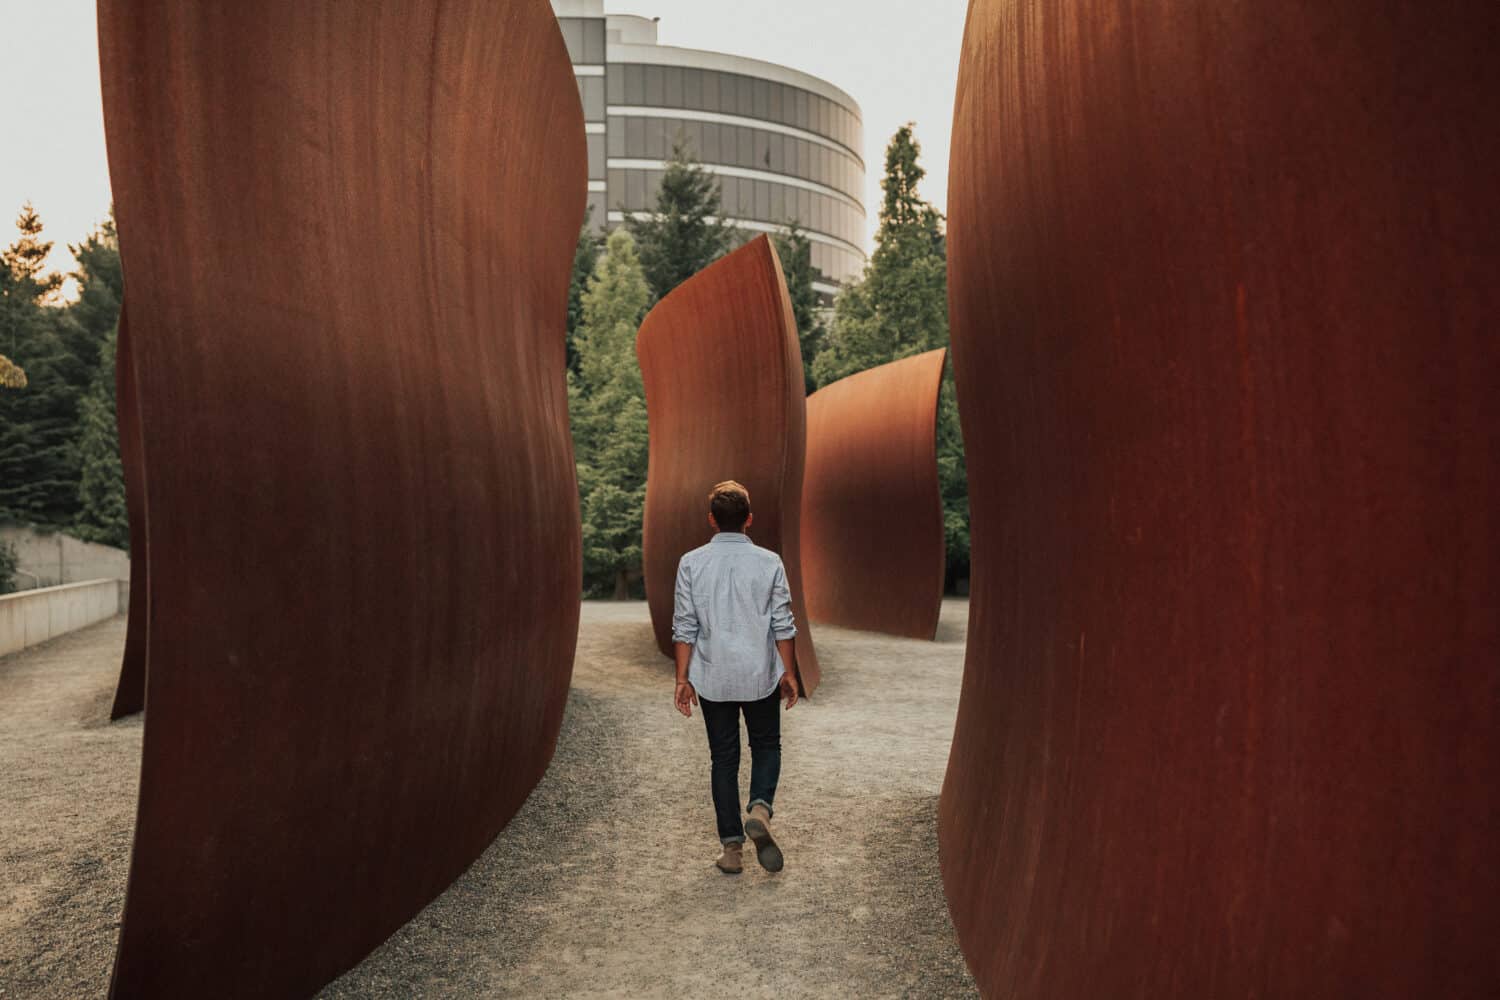 Free Things To Do In Seattle - Olympic Sculpture Park